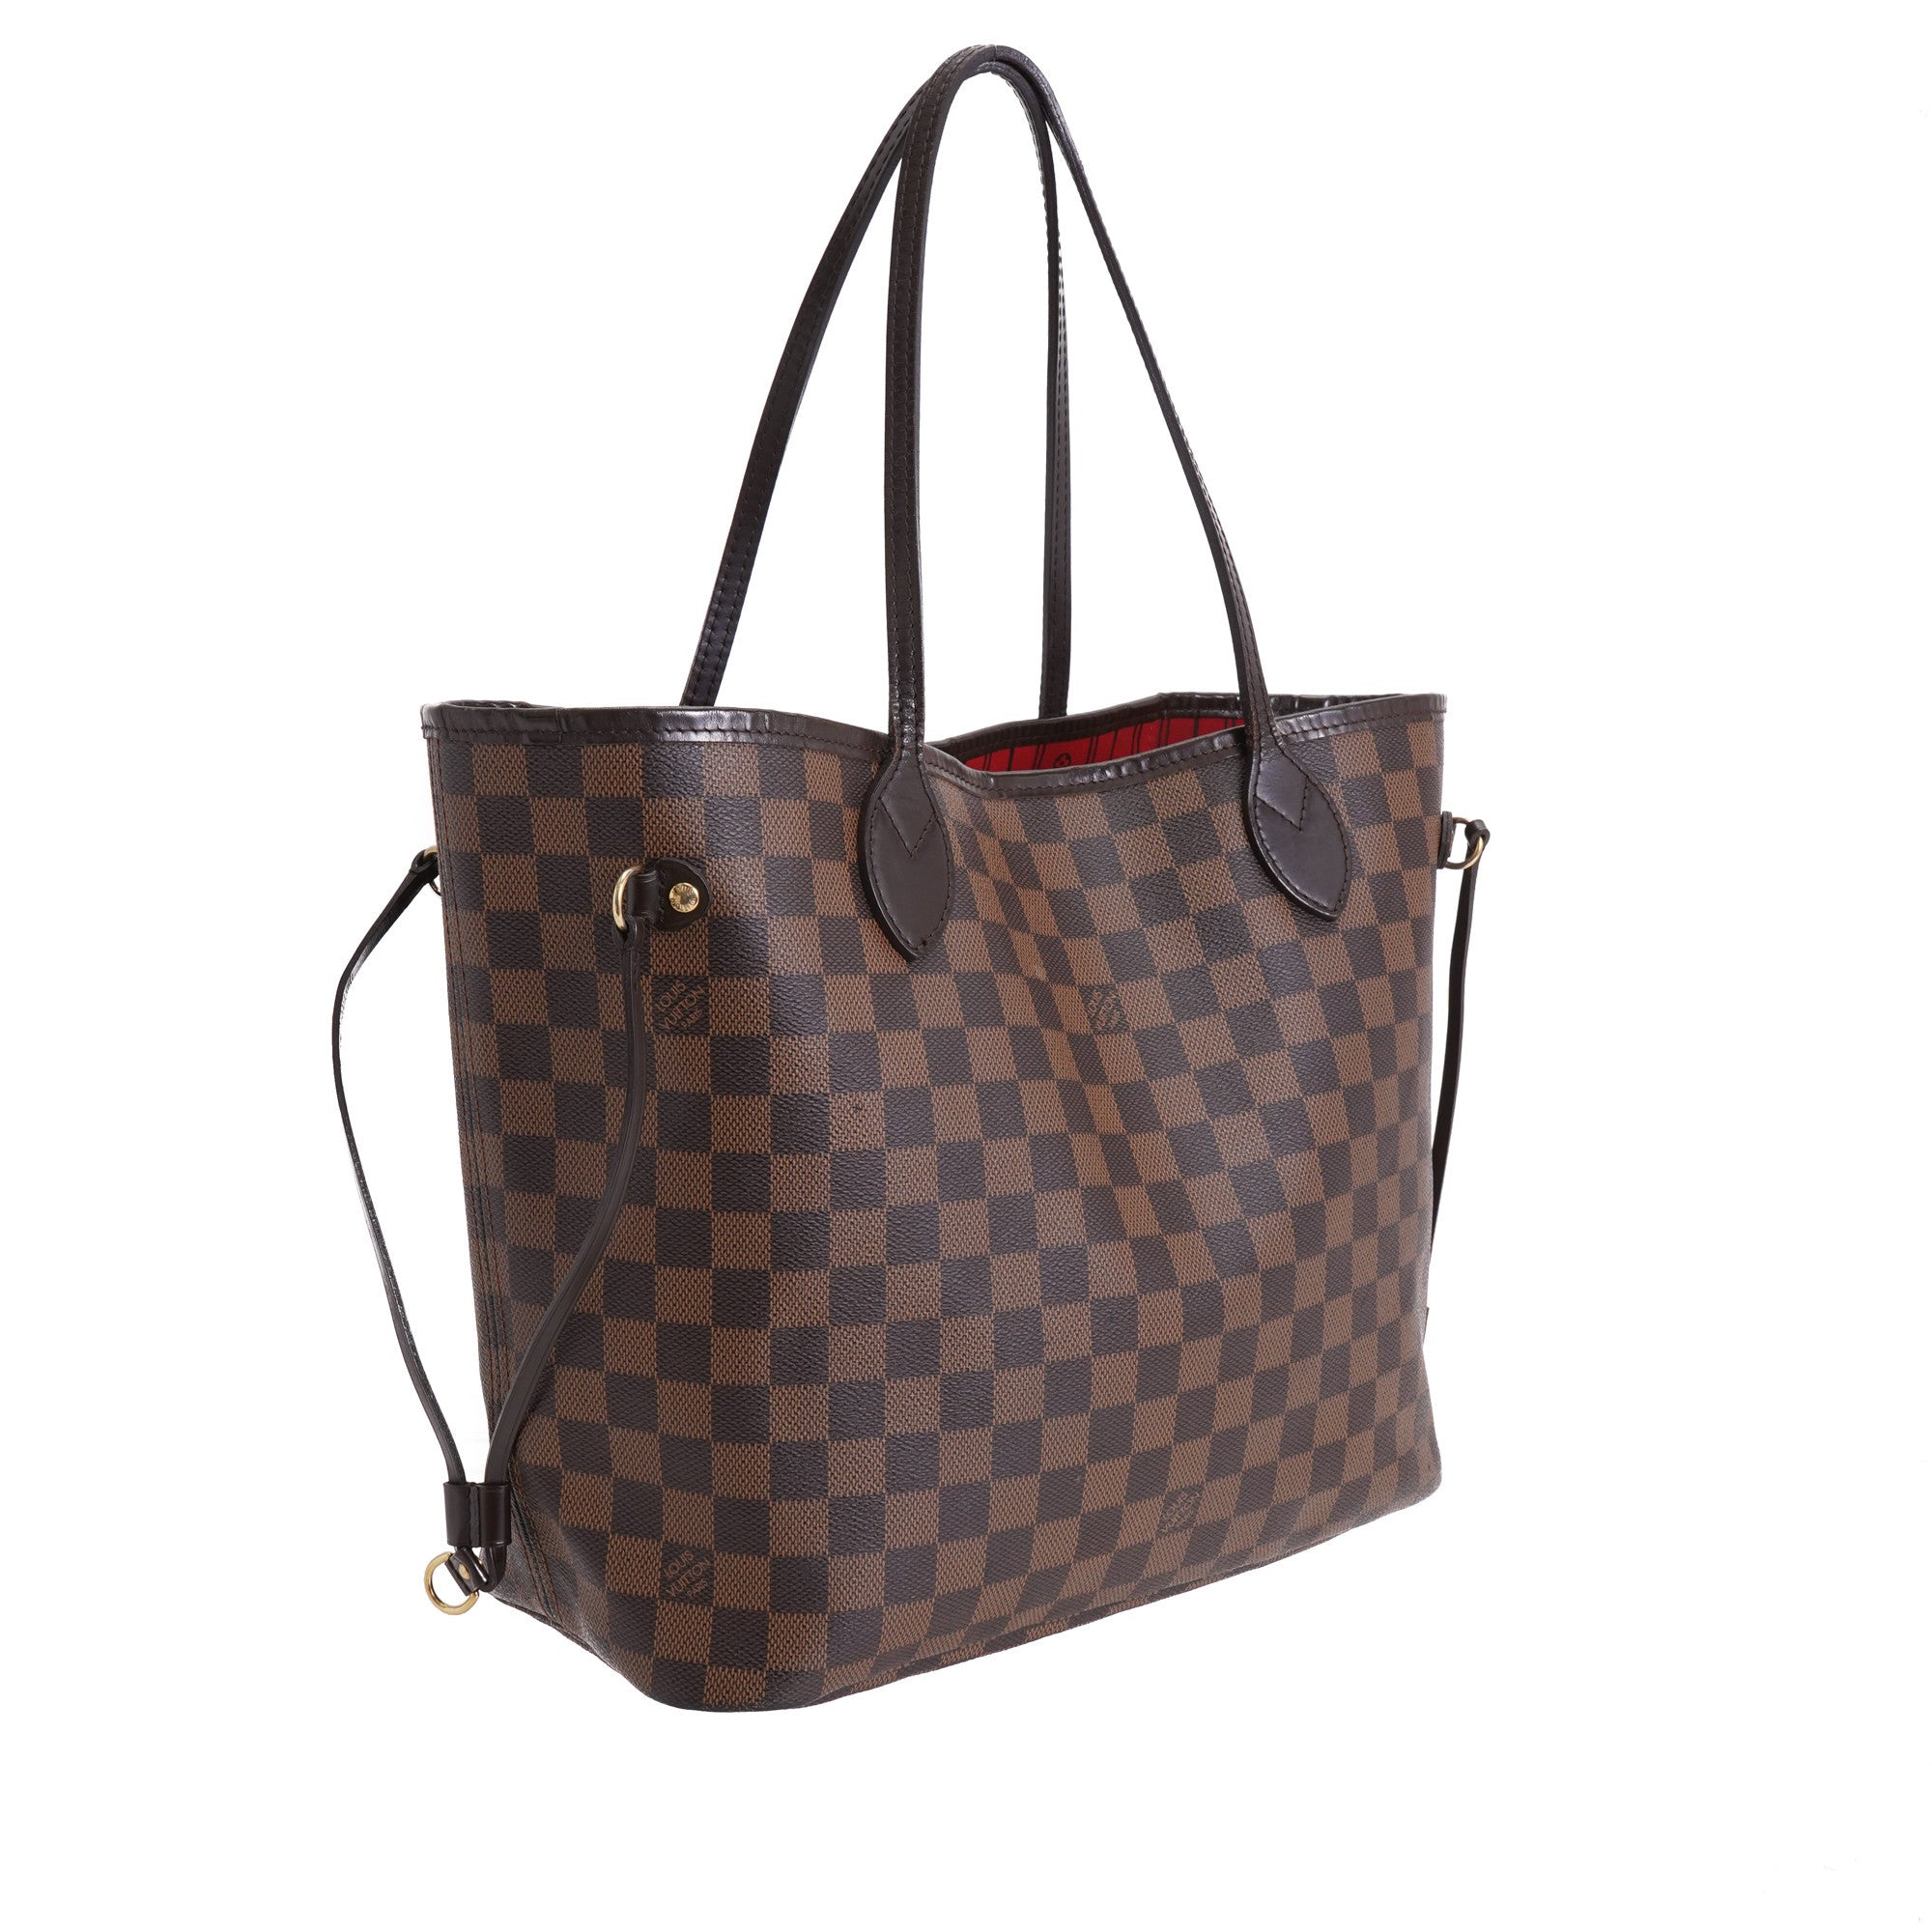 louis vuitton neverfull preloved